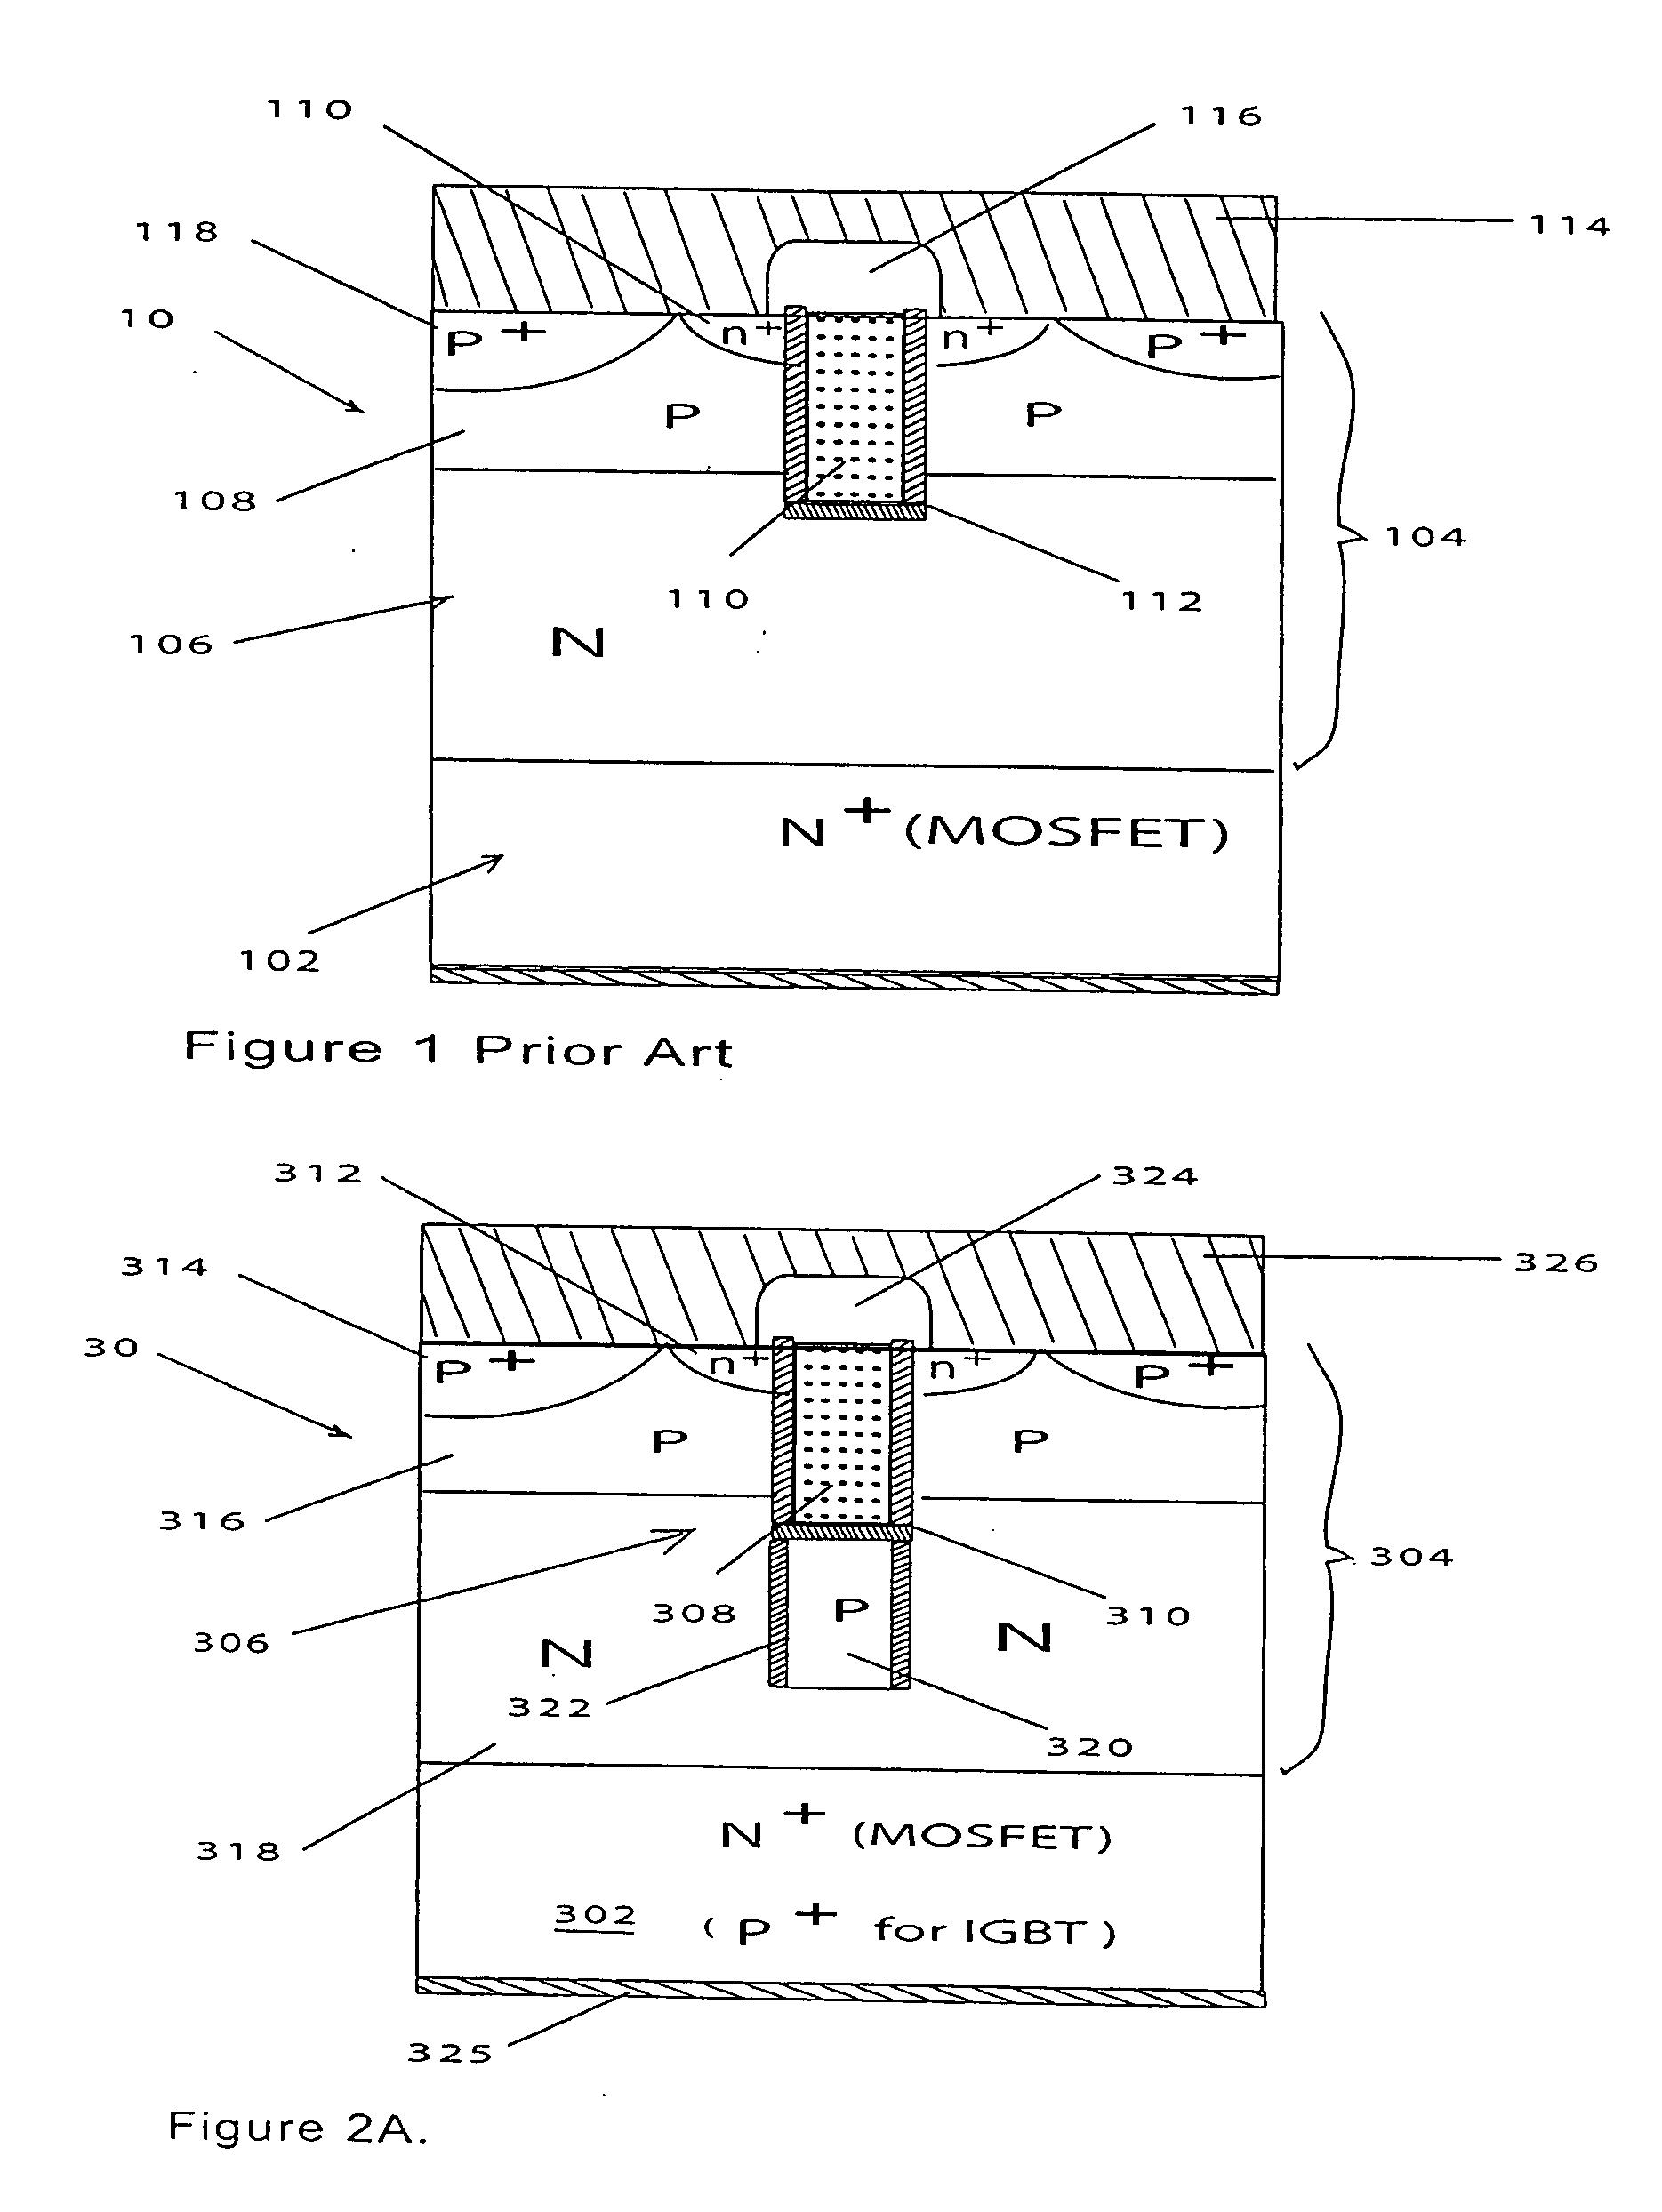 Semiconductor device containing dielectrically isolated PN junction for enhanced breakdown characteristics